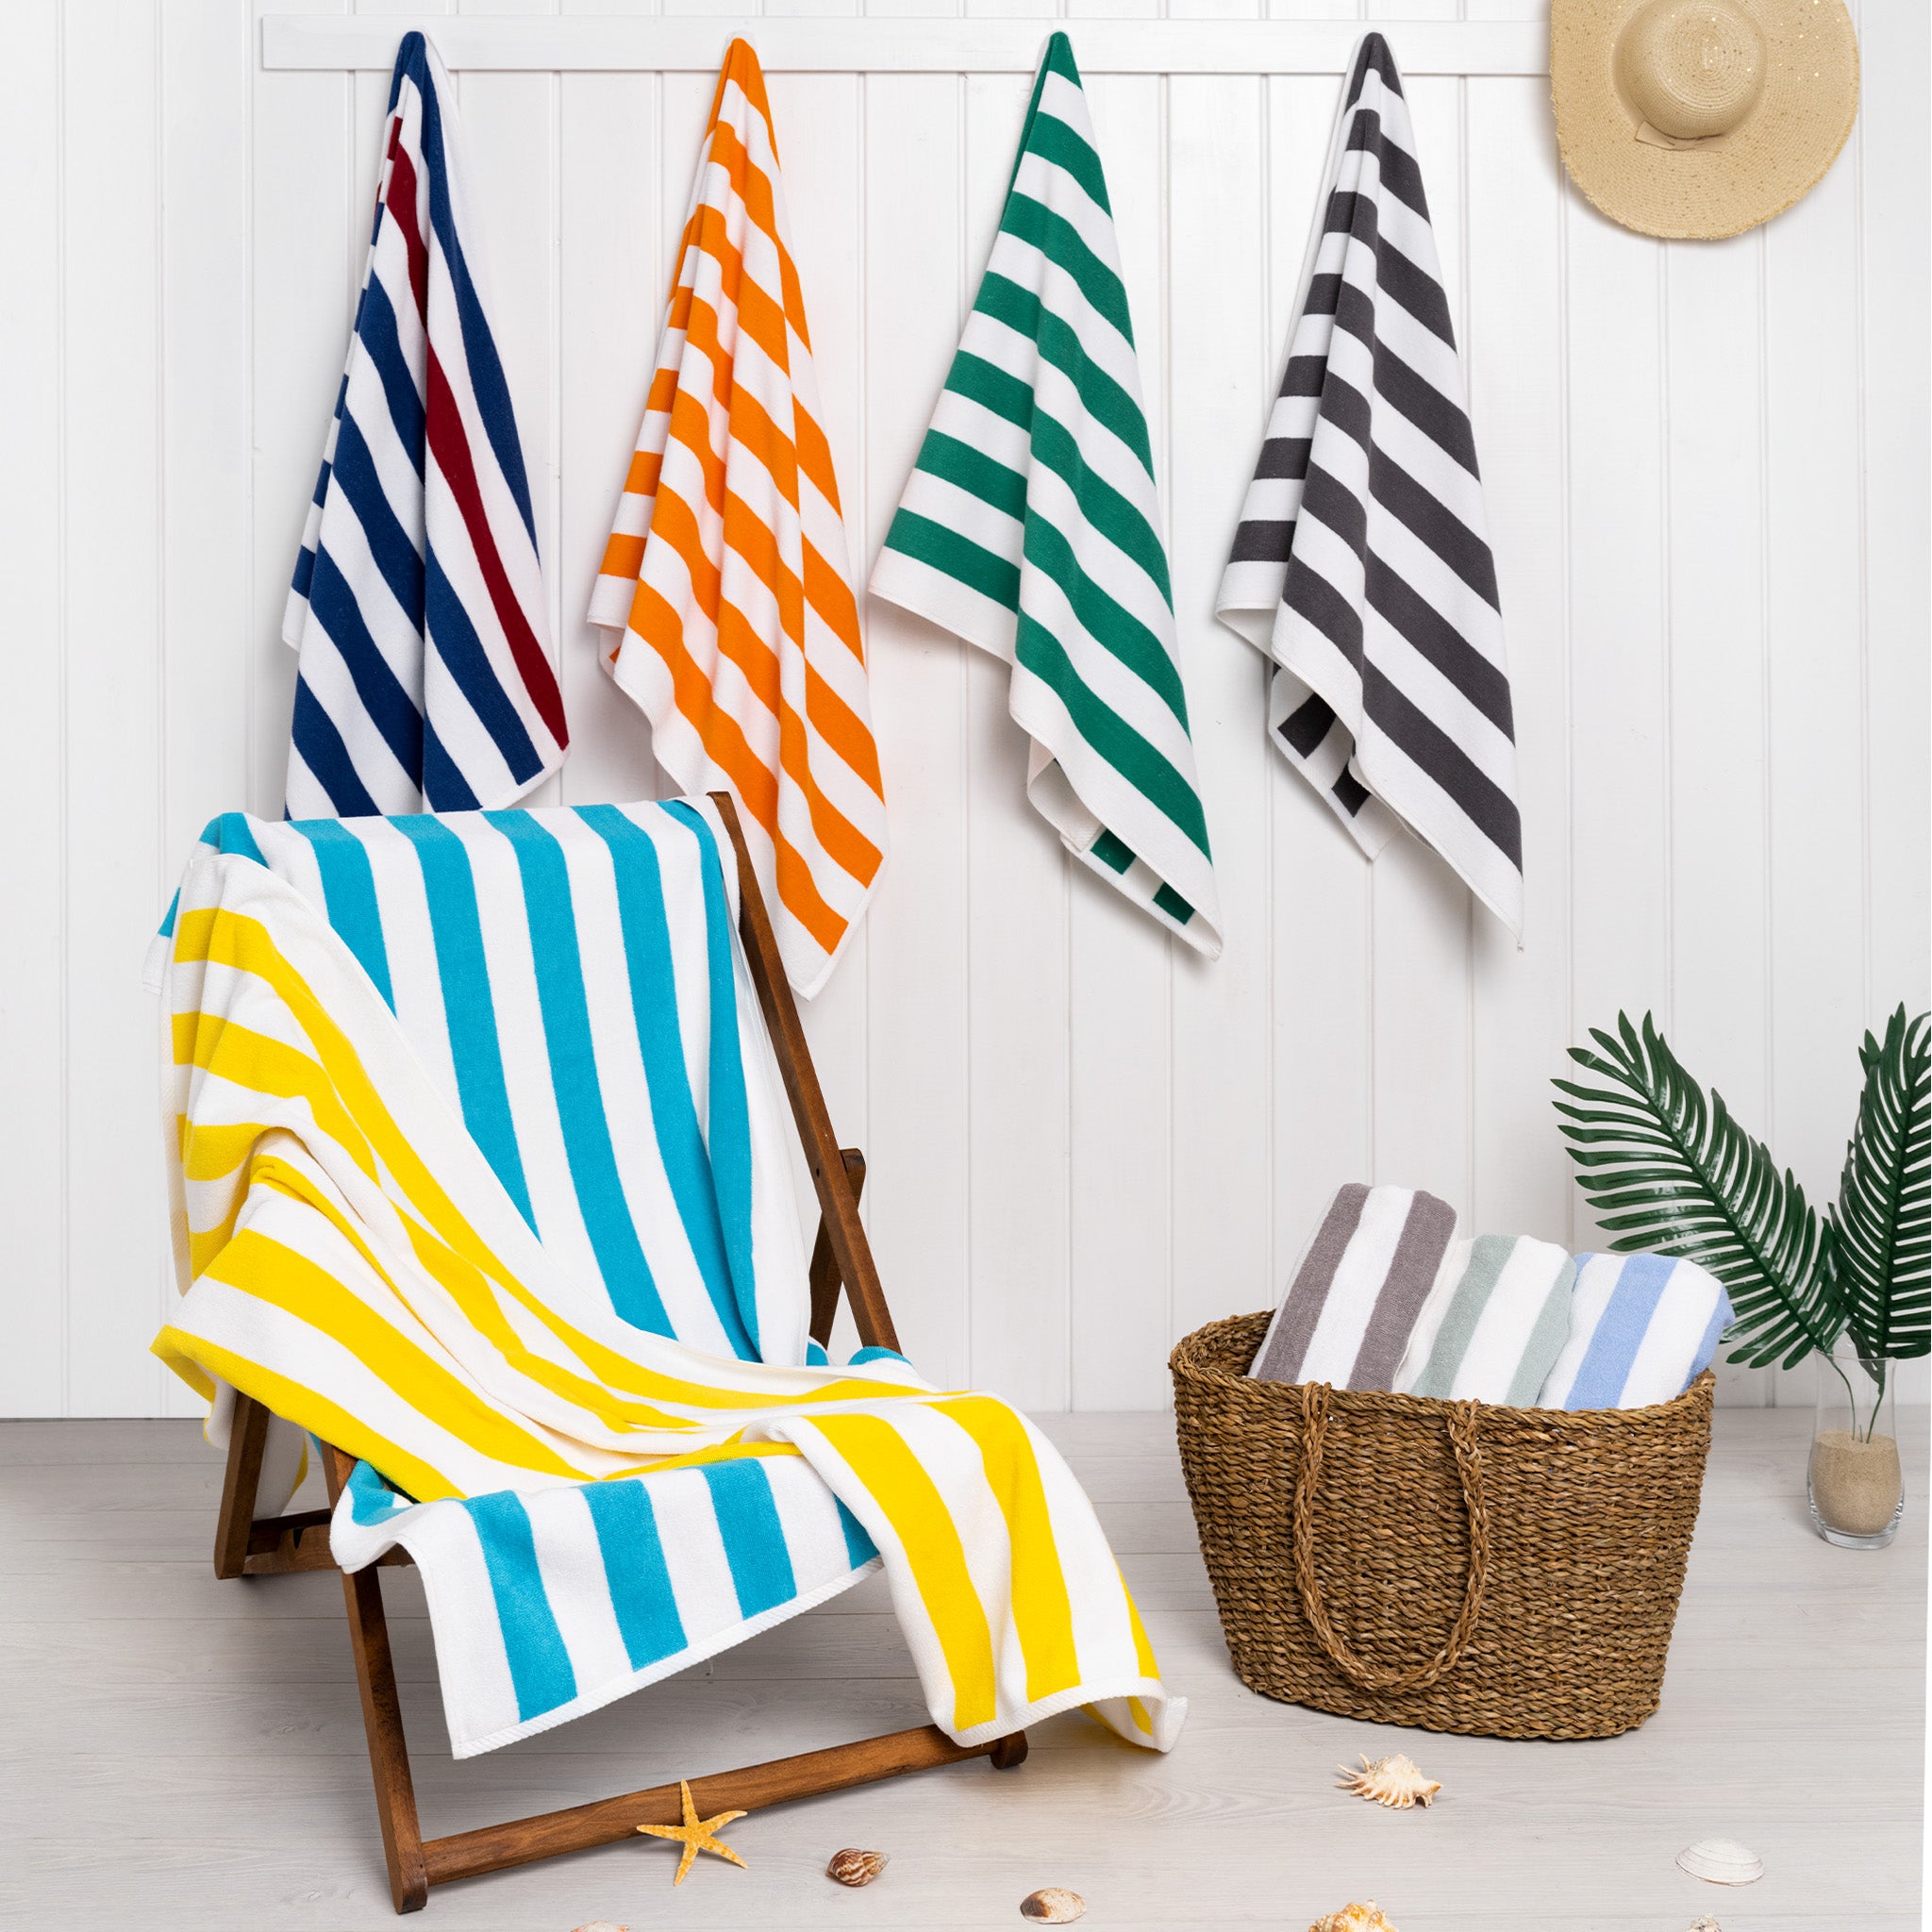 American Soft Linen 100% Cotton 4 Pack Beach Towels Cabana Striped Pool Towels -yellow-8